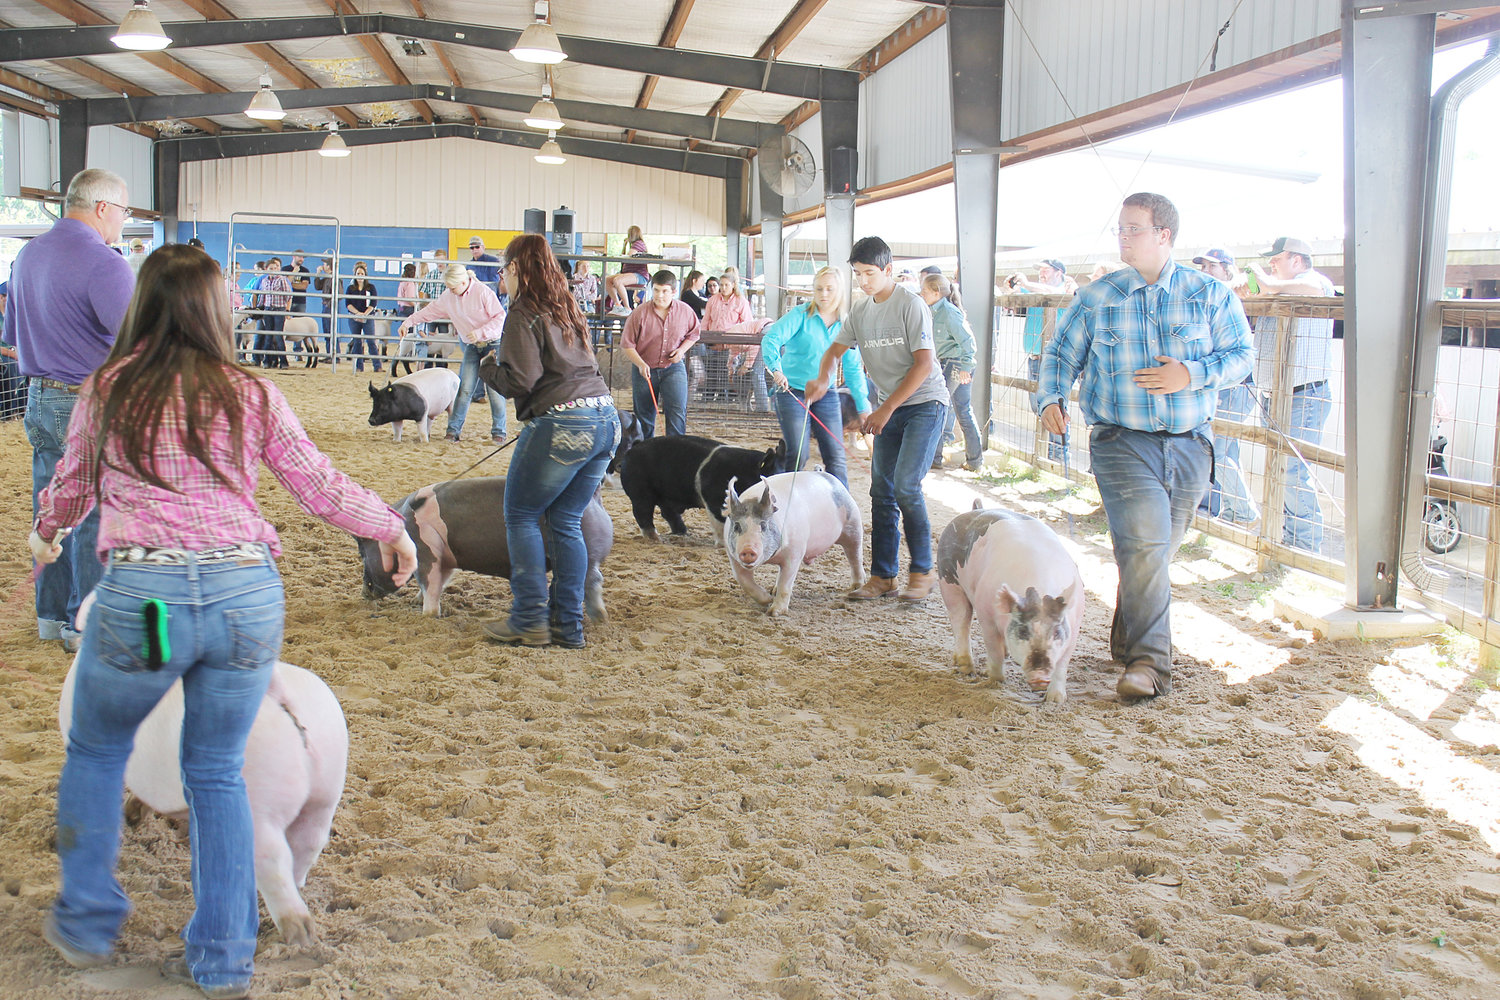 Quitman students herded their animals in the swine division during the Junior Livestock Show. Among the Quitman students in the ring are, very center of photo with black pig, Marcus Pollard; in grey tee shirt Silvano Castillo and behind and to his right is Kathryn Hudman.